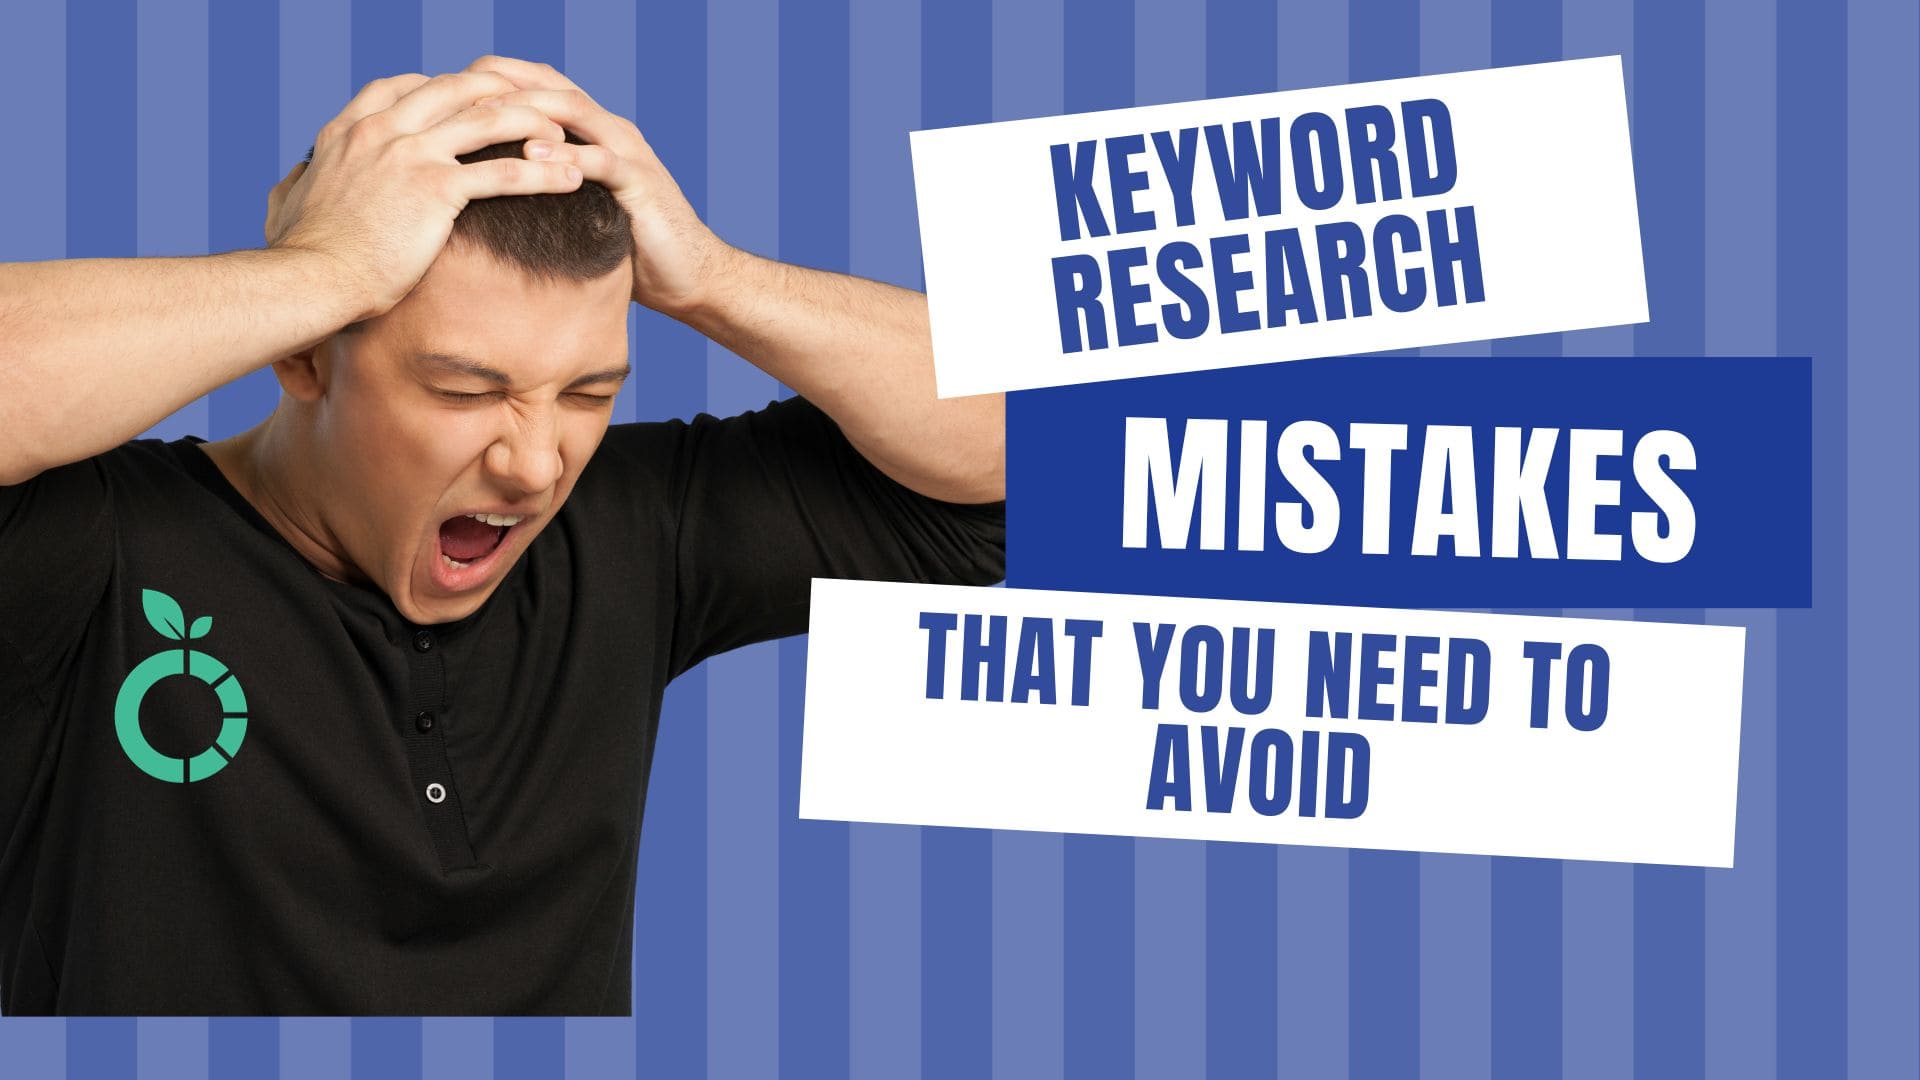 Avoid the 14 most common keyword research mistakes with these helpful tips.